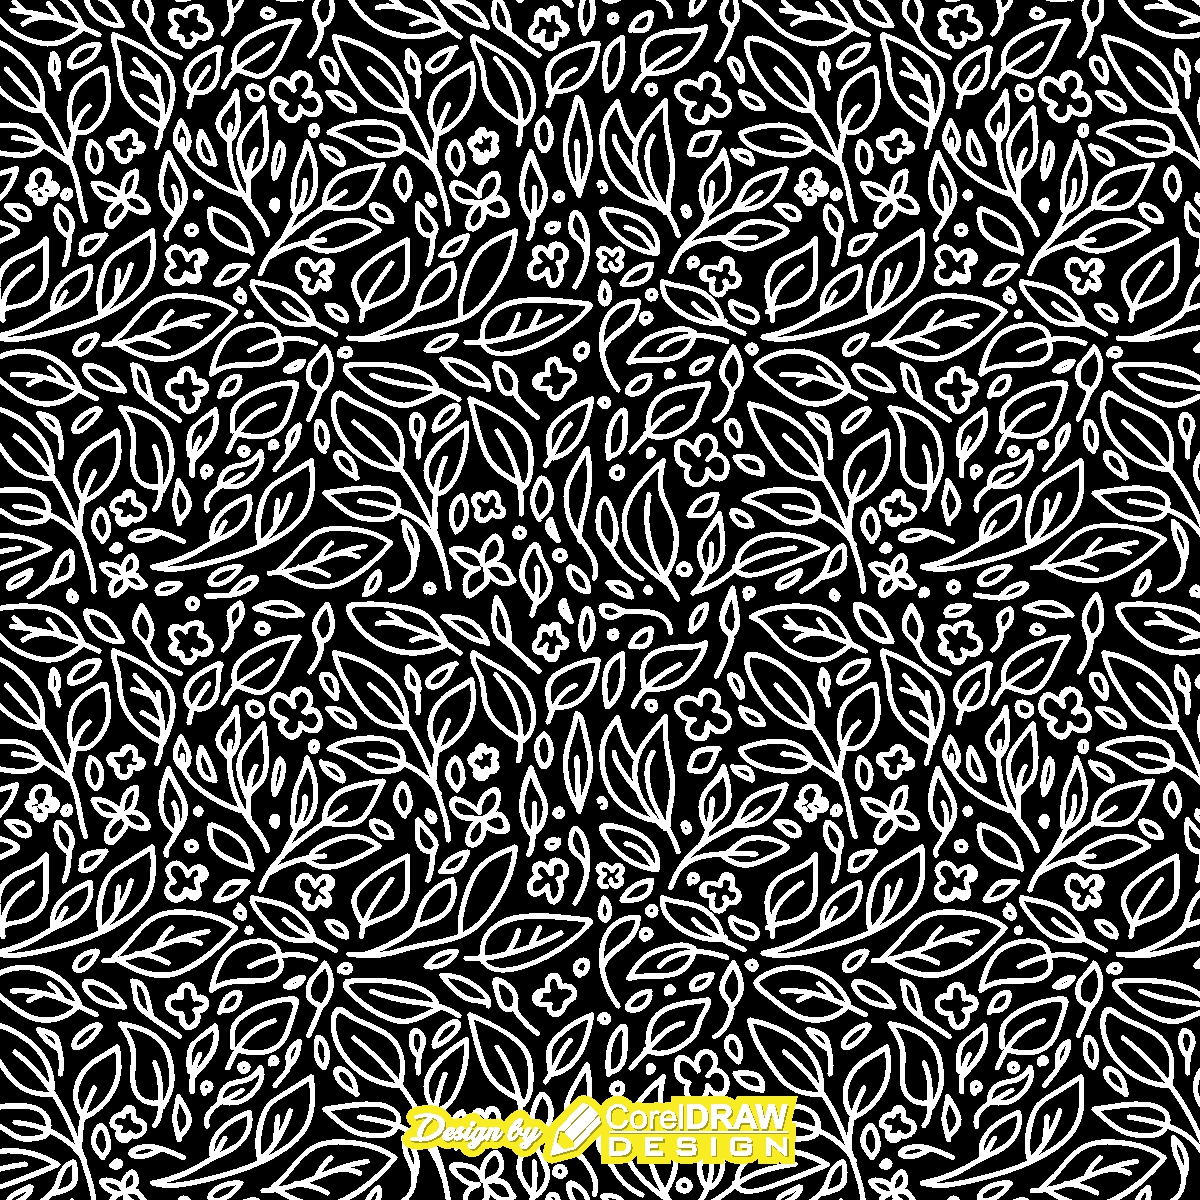 Leaves pattern Black background download 2021 Template